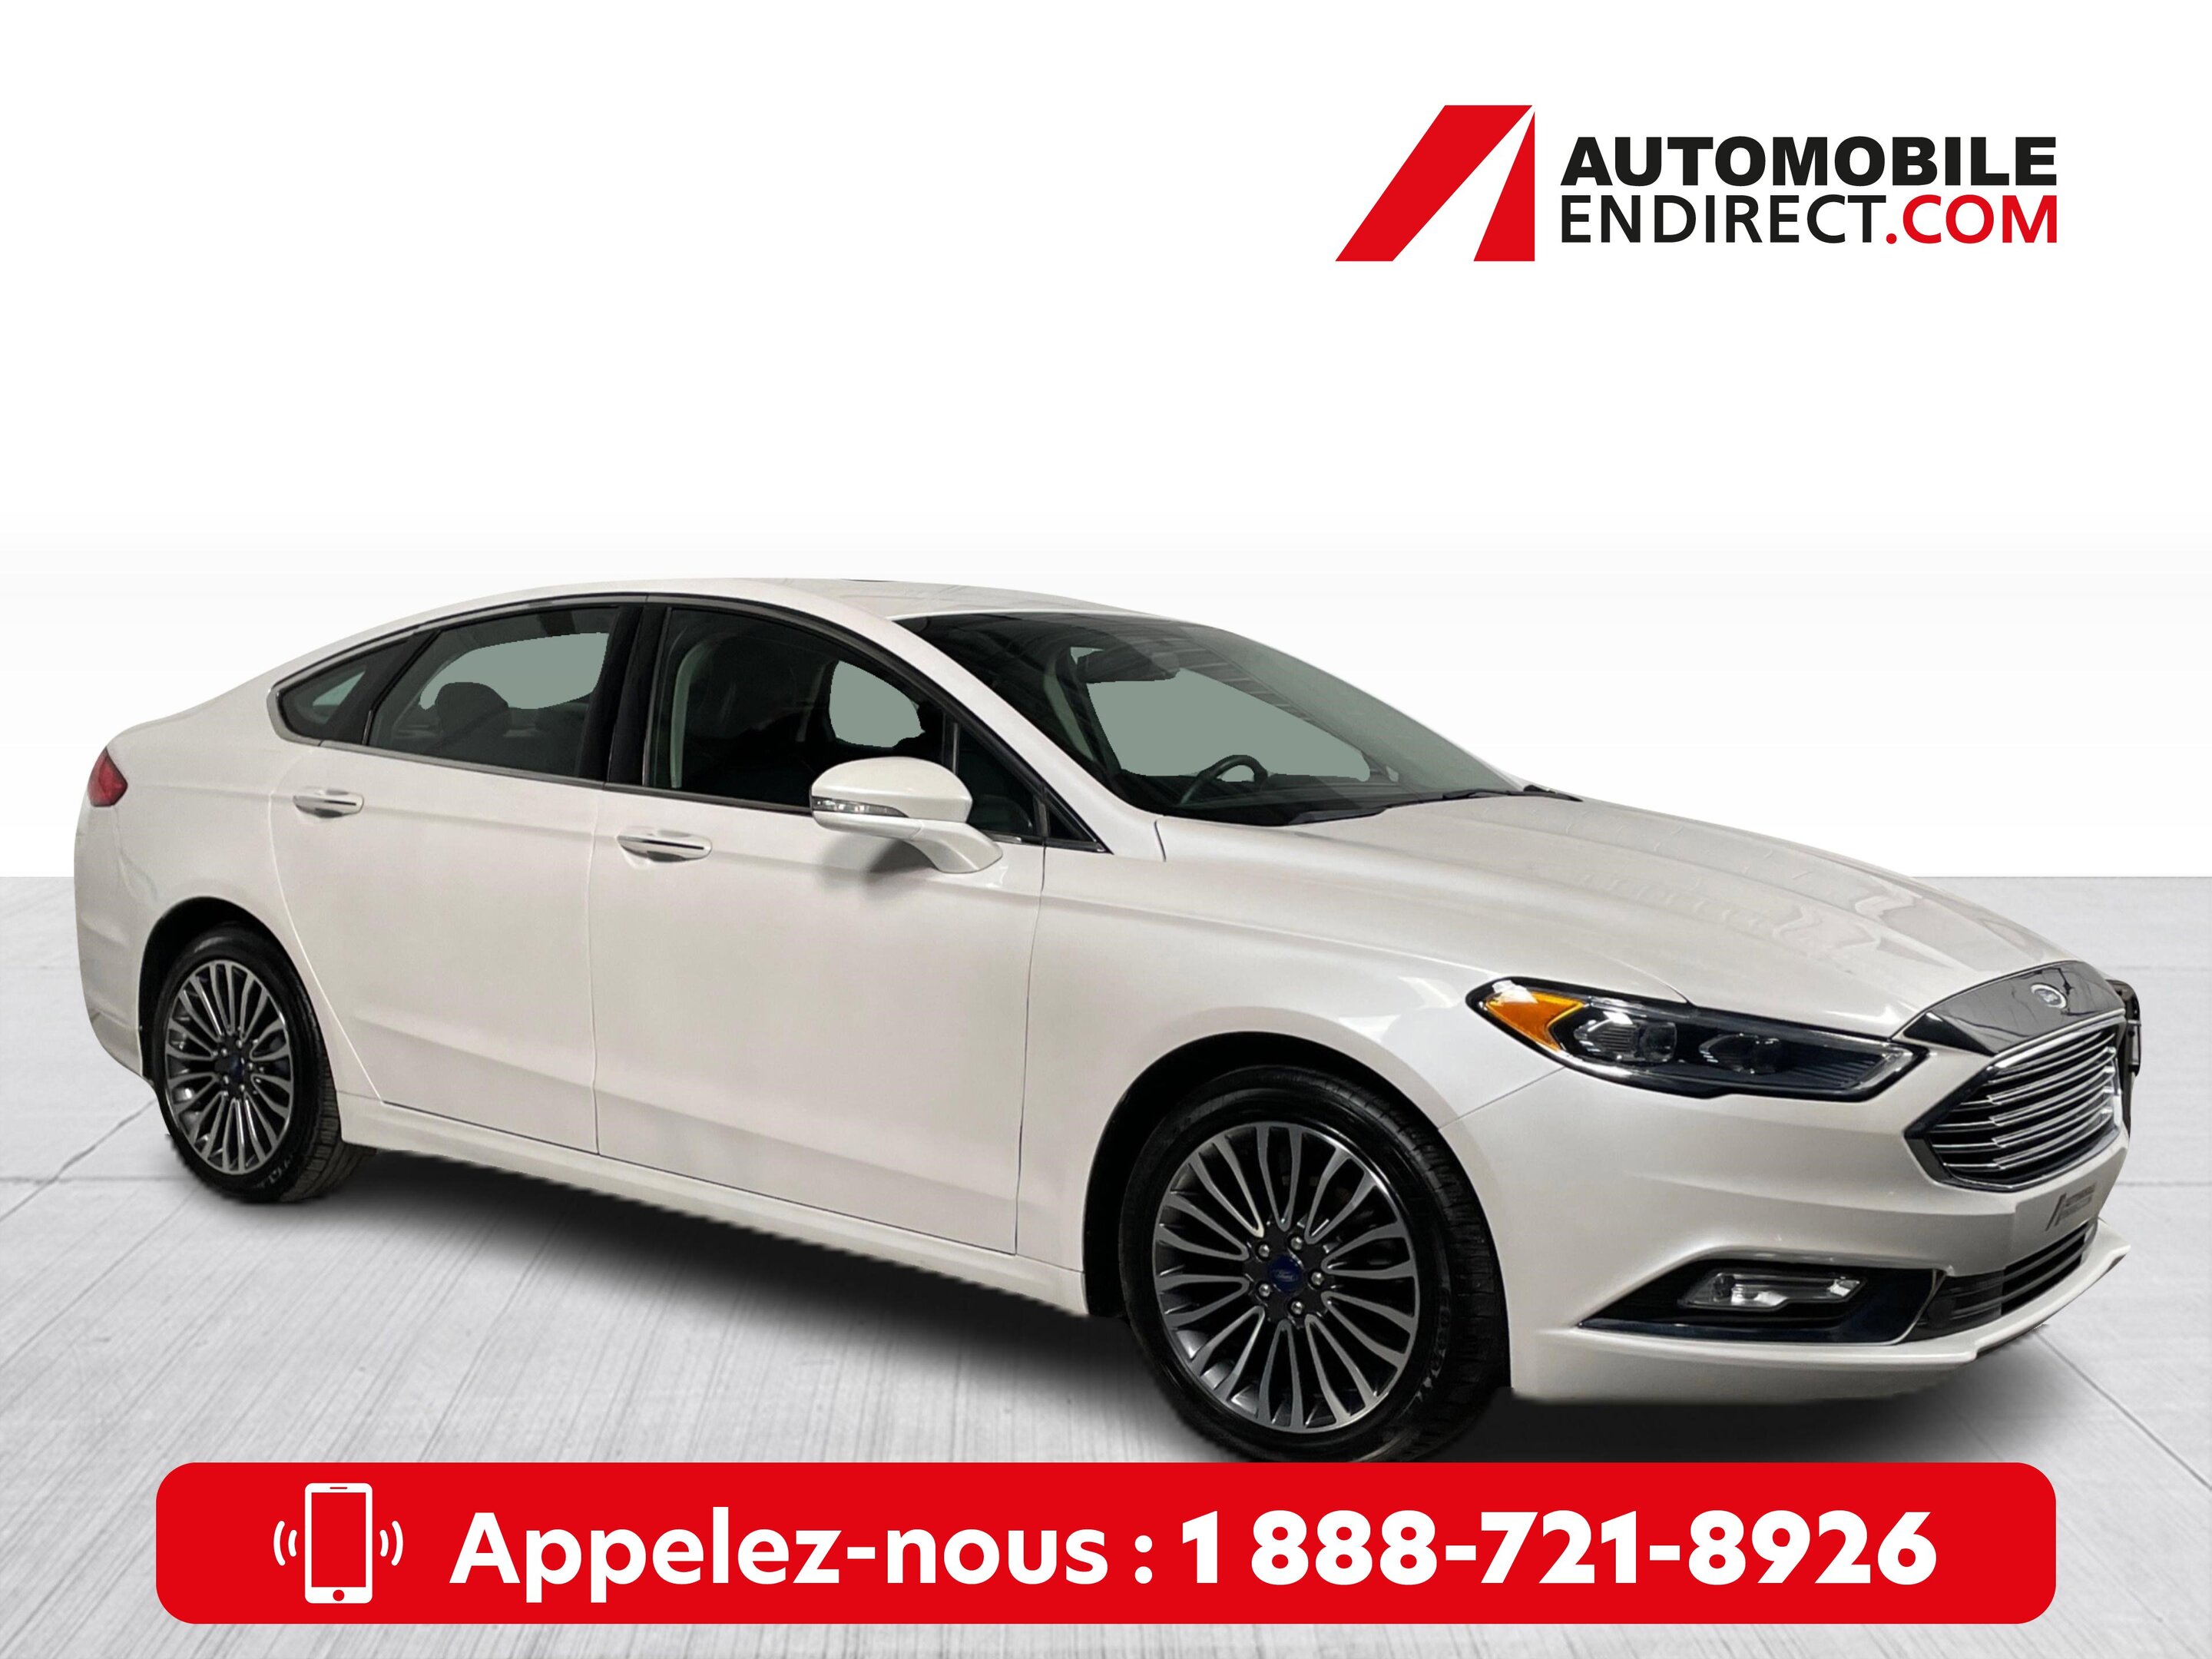 2017 Ford Fusion SE AWD Cuir Toit Mags Camera de Recul Sieges Chauf